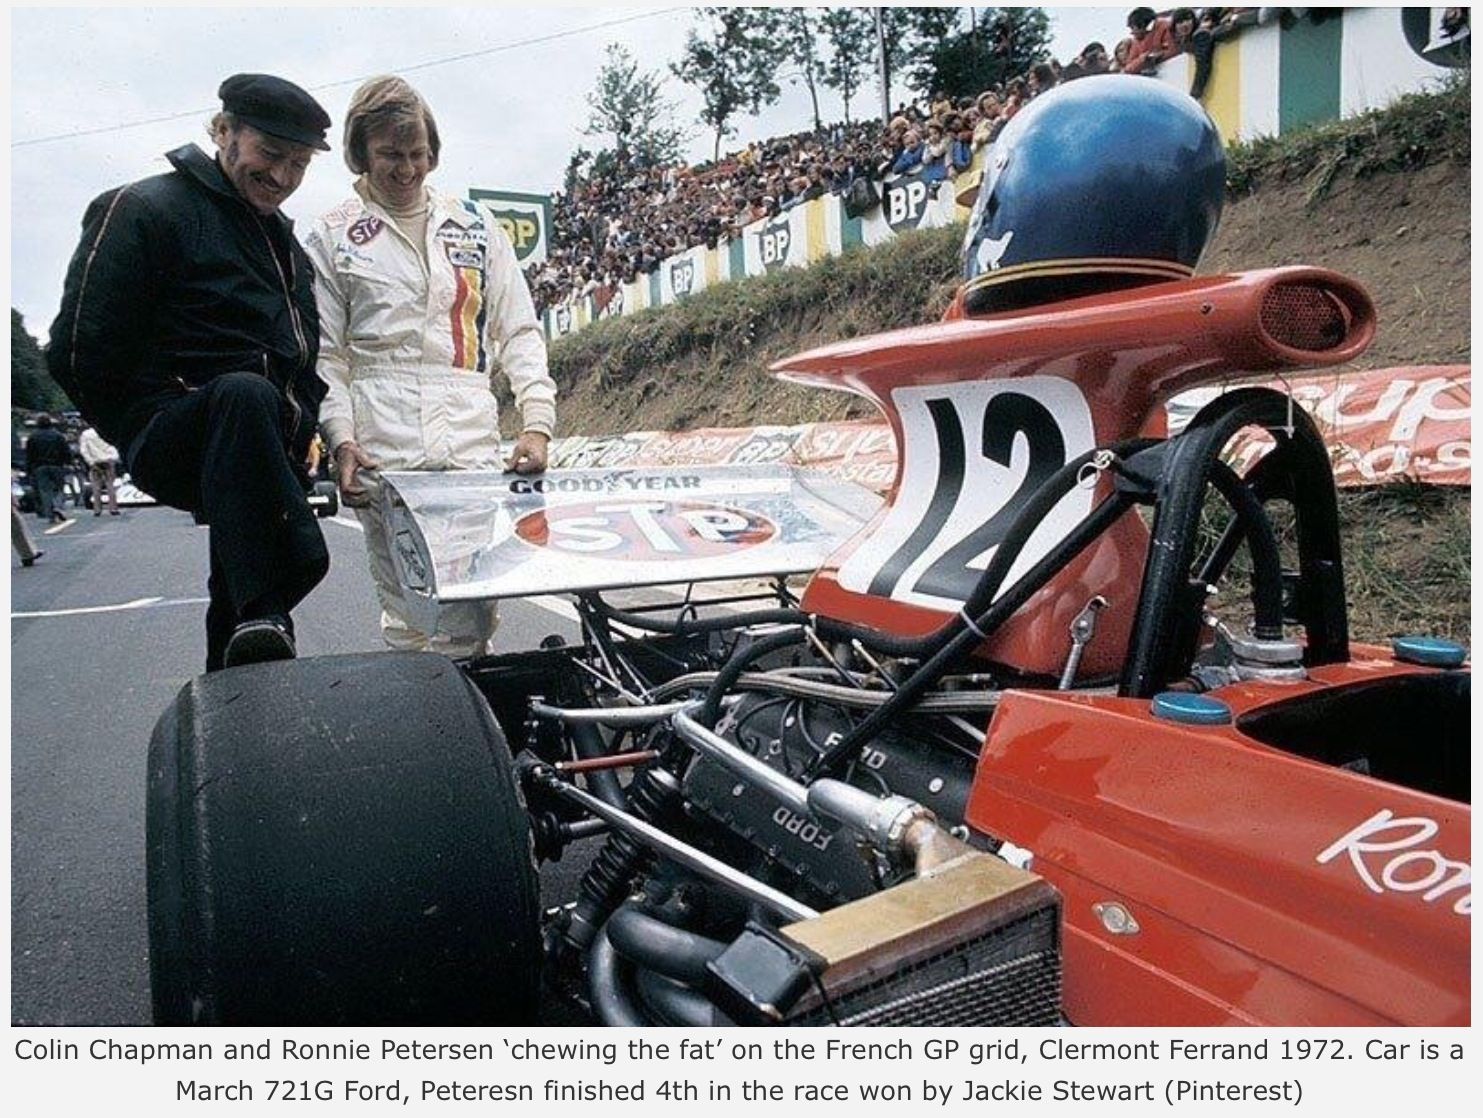 Colin Chapman and Ronnie Peterson.